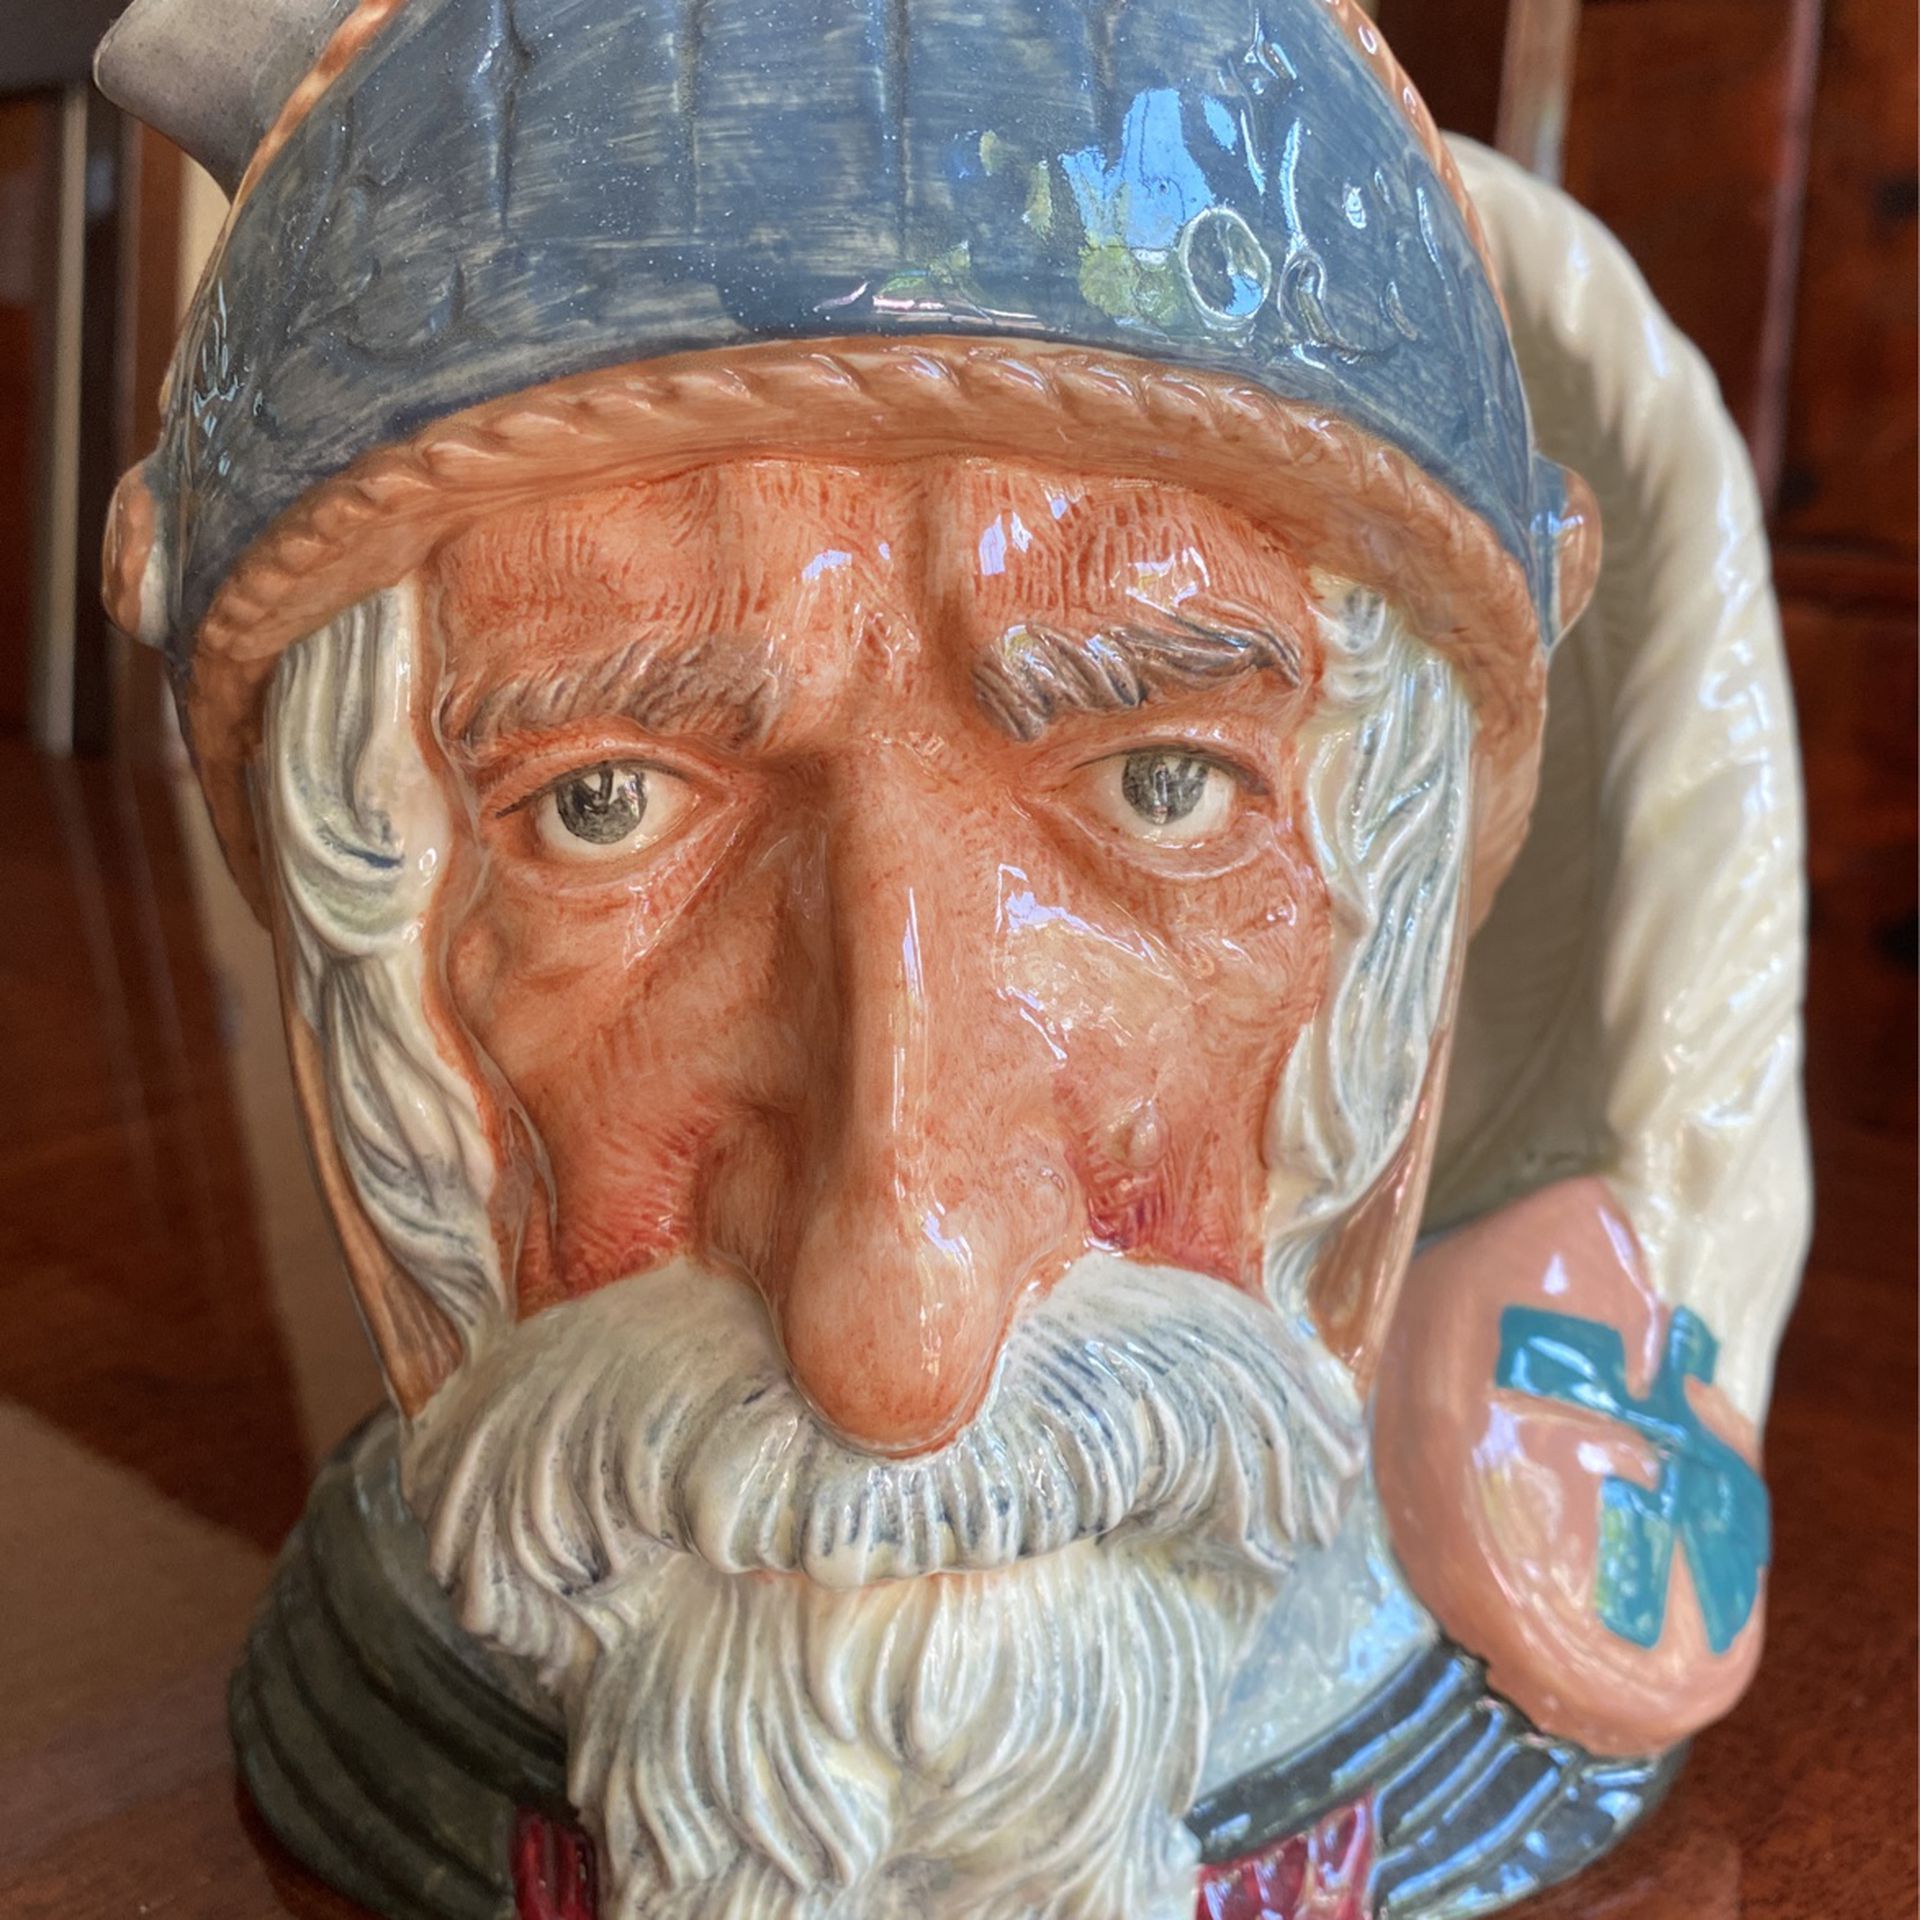 Don Quixote fine porcelain royal Doulton signed Marked and numbered large Facebook